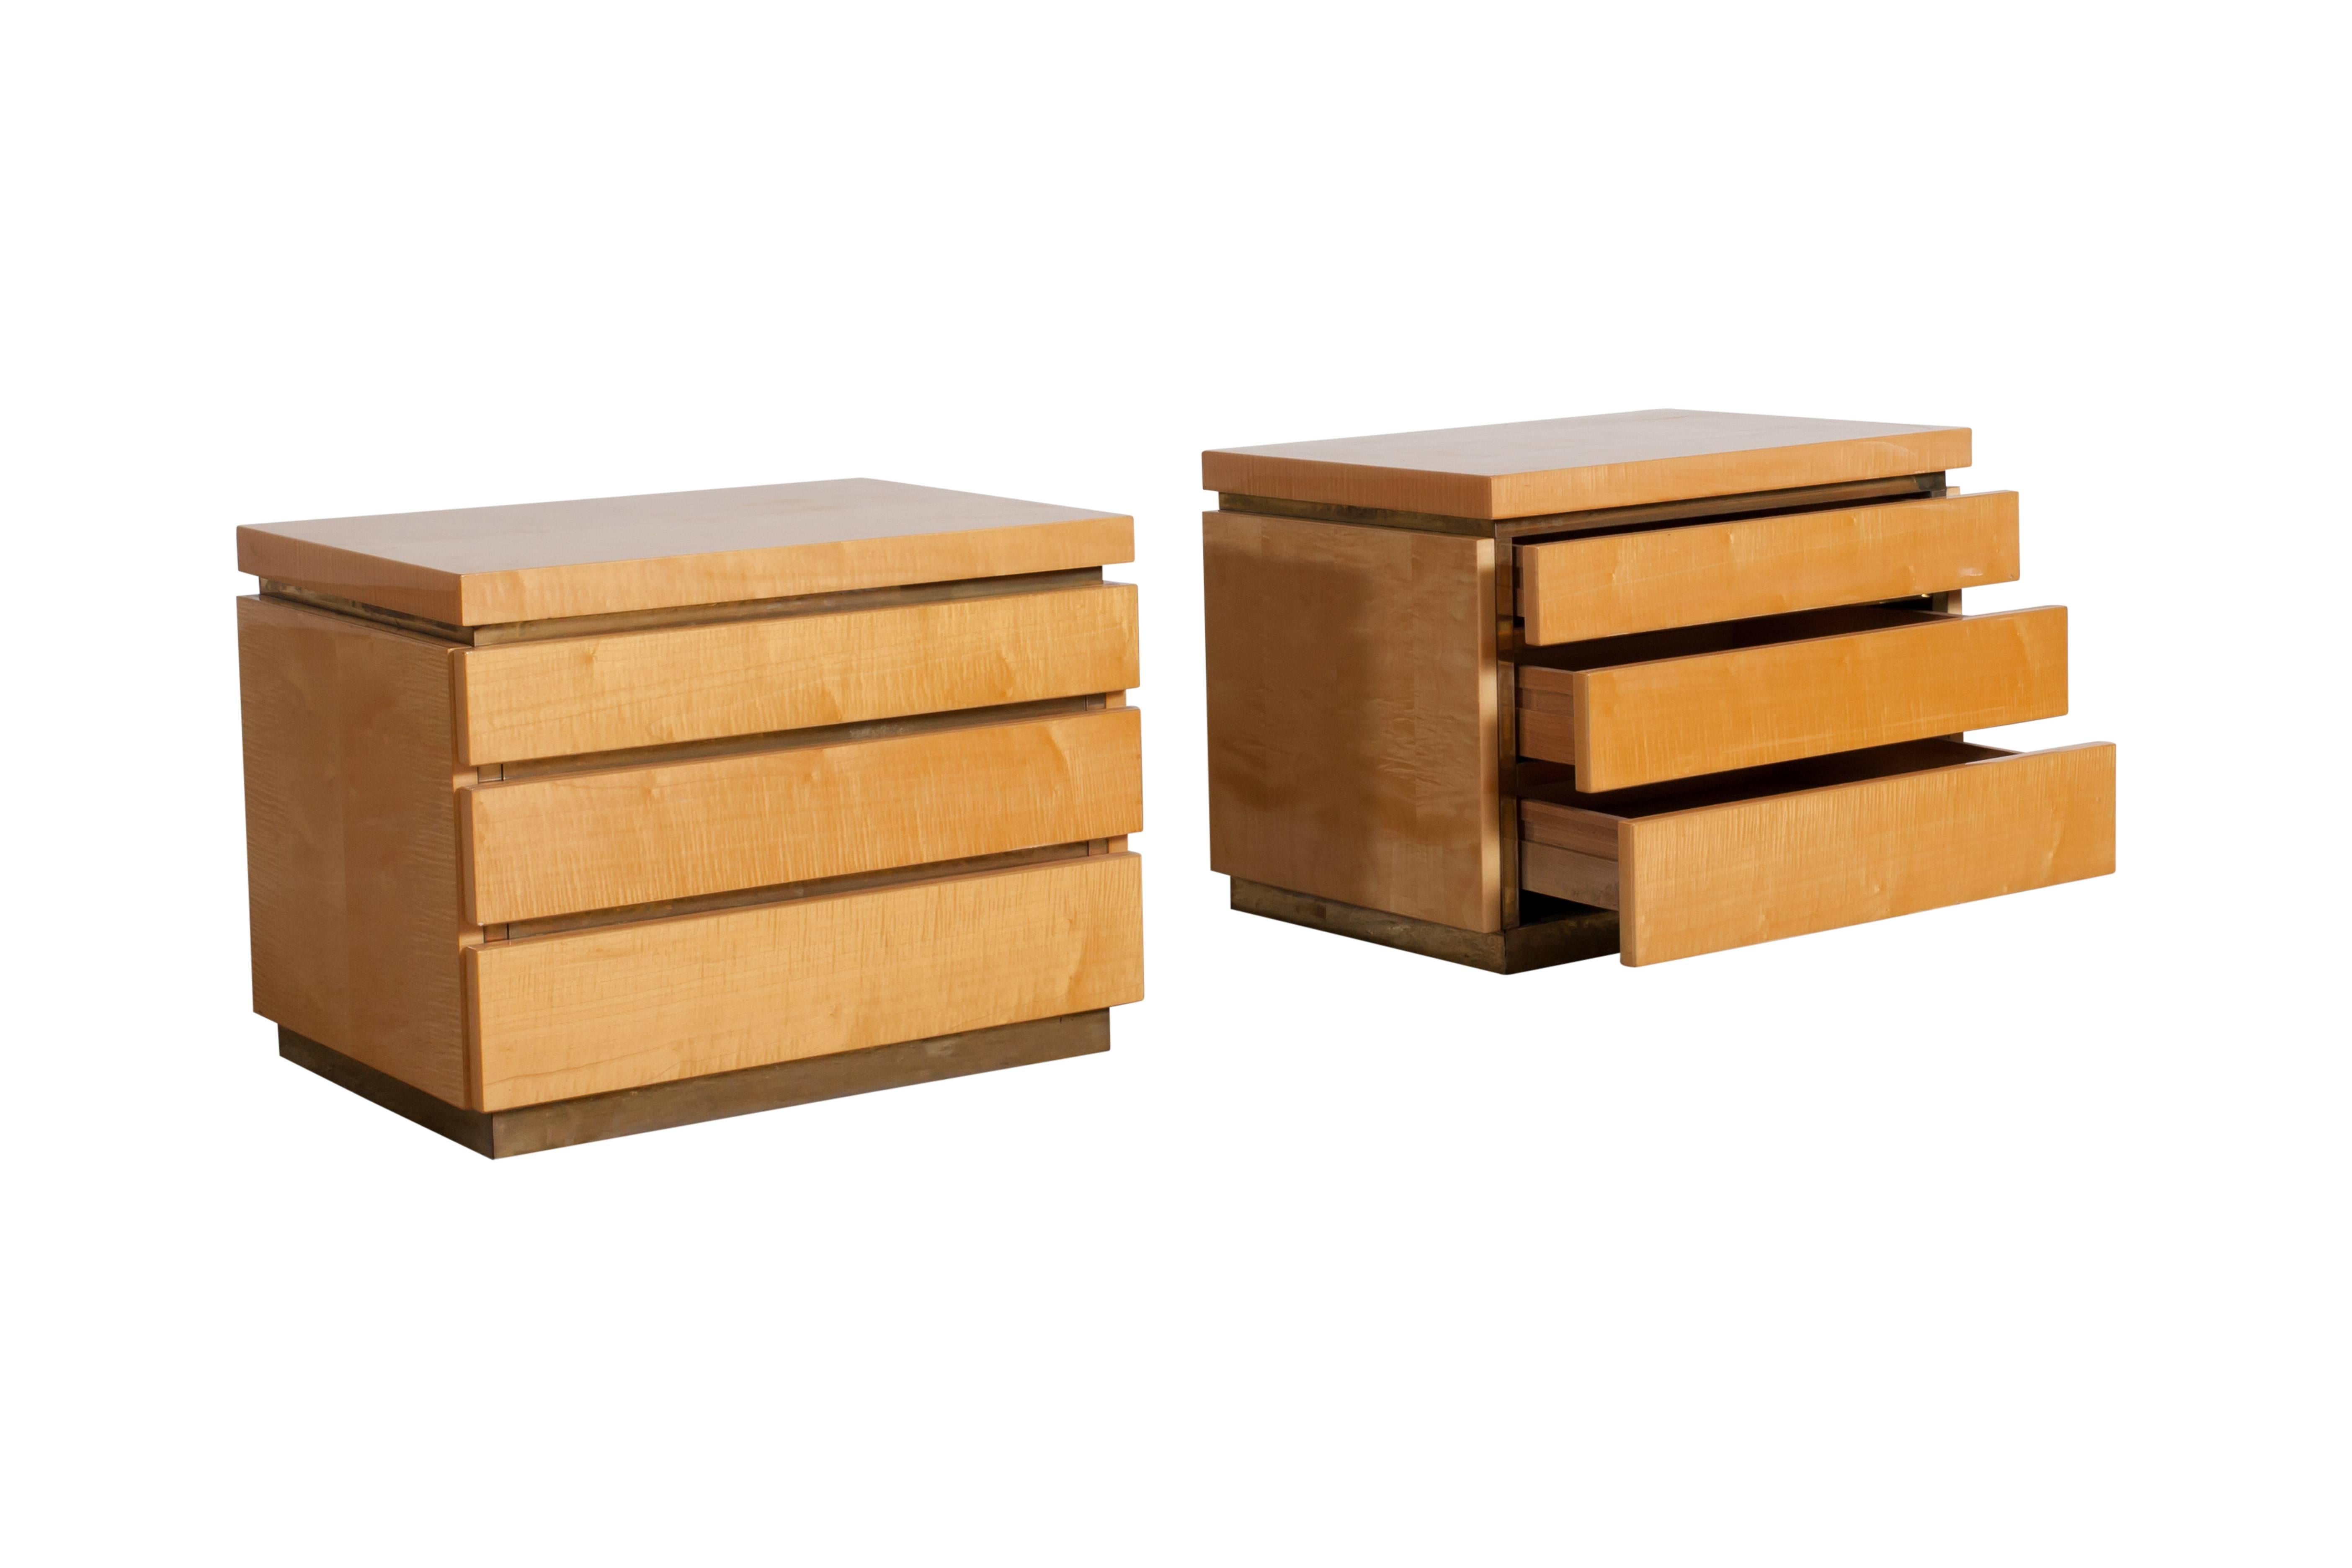 Mid-century modern Hollywood regency / Italian glam side tables by Jean Claude Mahey, France - ca 1980s
Lacquered beech veneer and brass.
Would fit well in an eclectic interior

